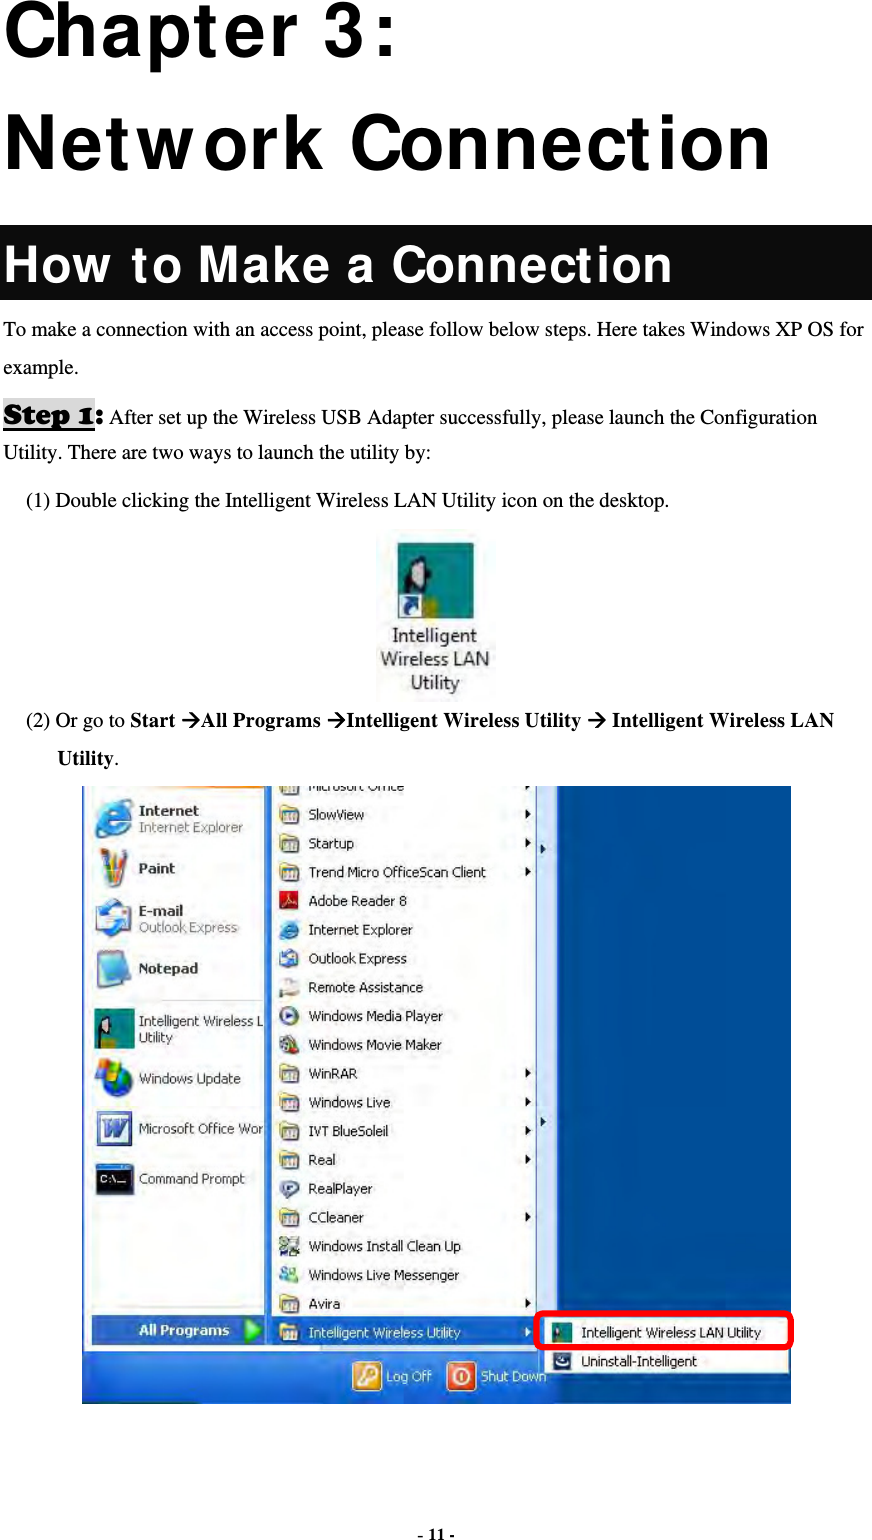  - 11 - Chapter 3: Network Connection How to Make a Connection To make a connection with an access point, please follow below steps. Here takes Windows XP OS for example. Step 1: After set up the Wireless USB Adapter successfully, please launch the Configuration Utility. There are two ways to launch the utility by:   (1) Double clicking the Intelligent Wireless LAN Utility icon on the desktop.  (2) Or go to Start All Programs Intelligent Wireless Utility  Intelligent Wireless LAN Utility.  